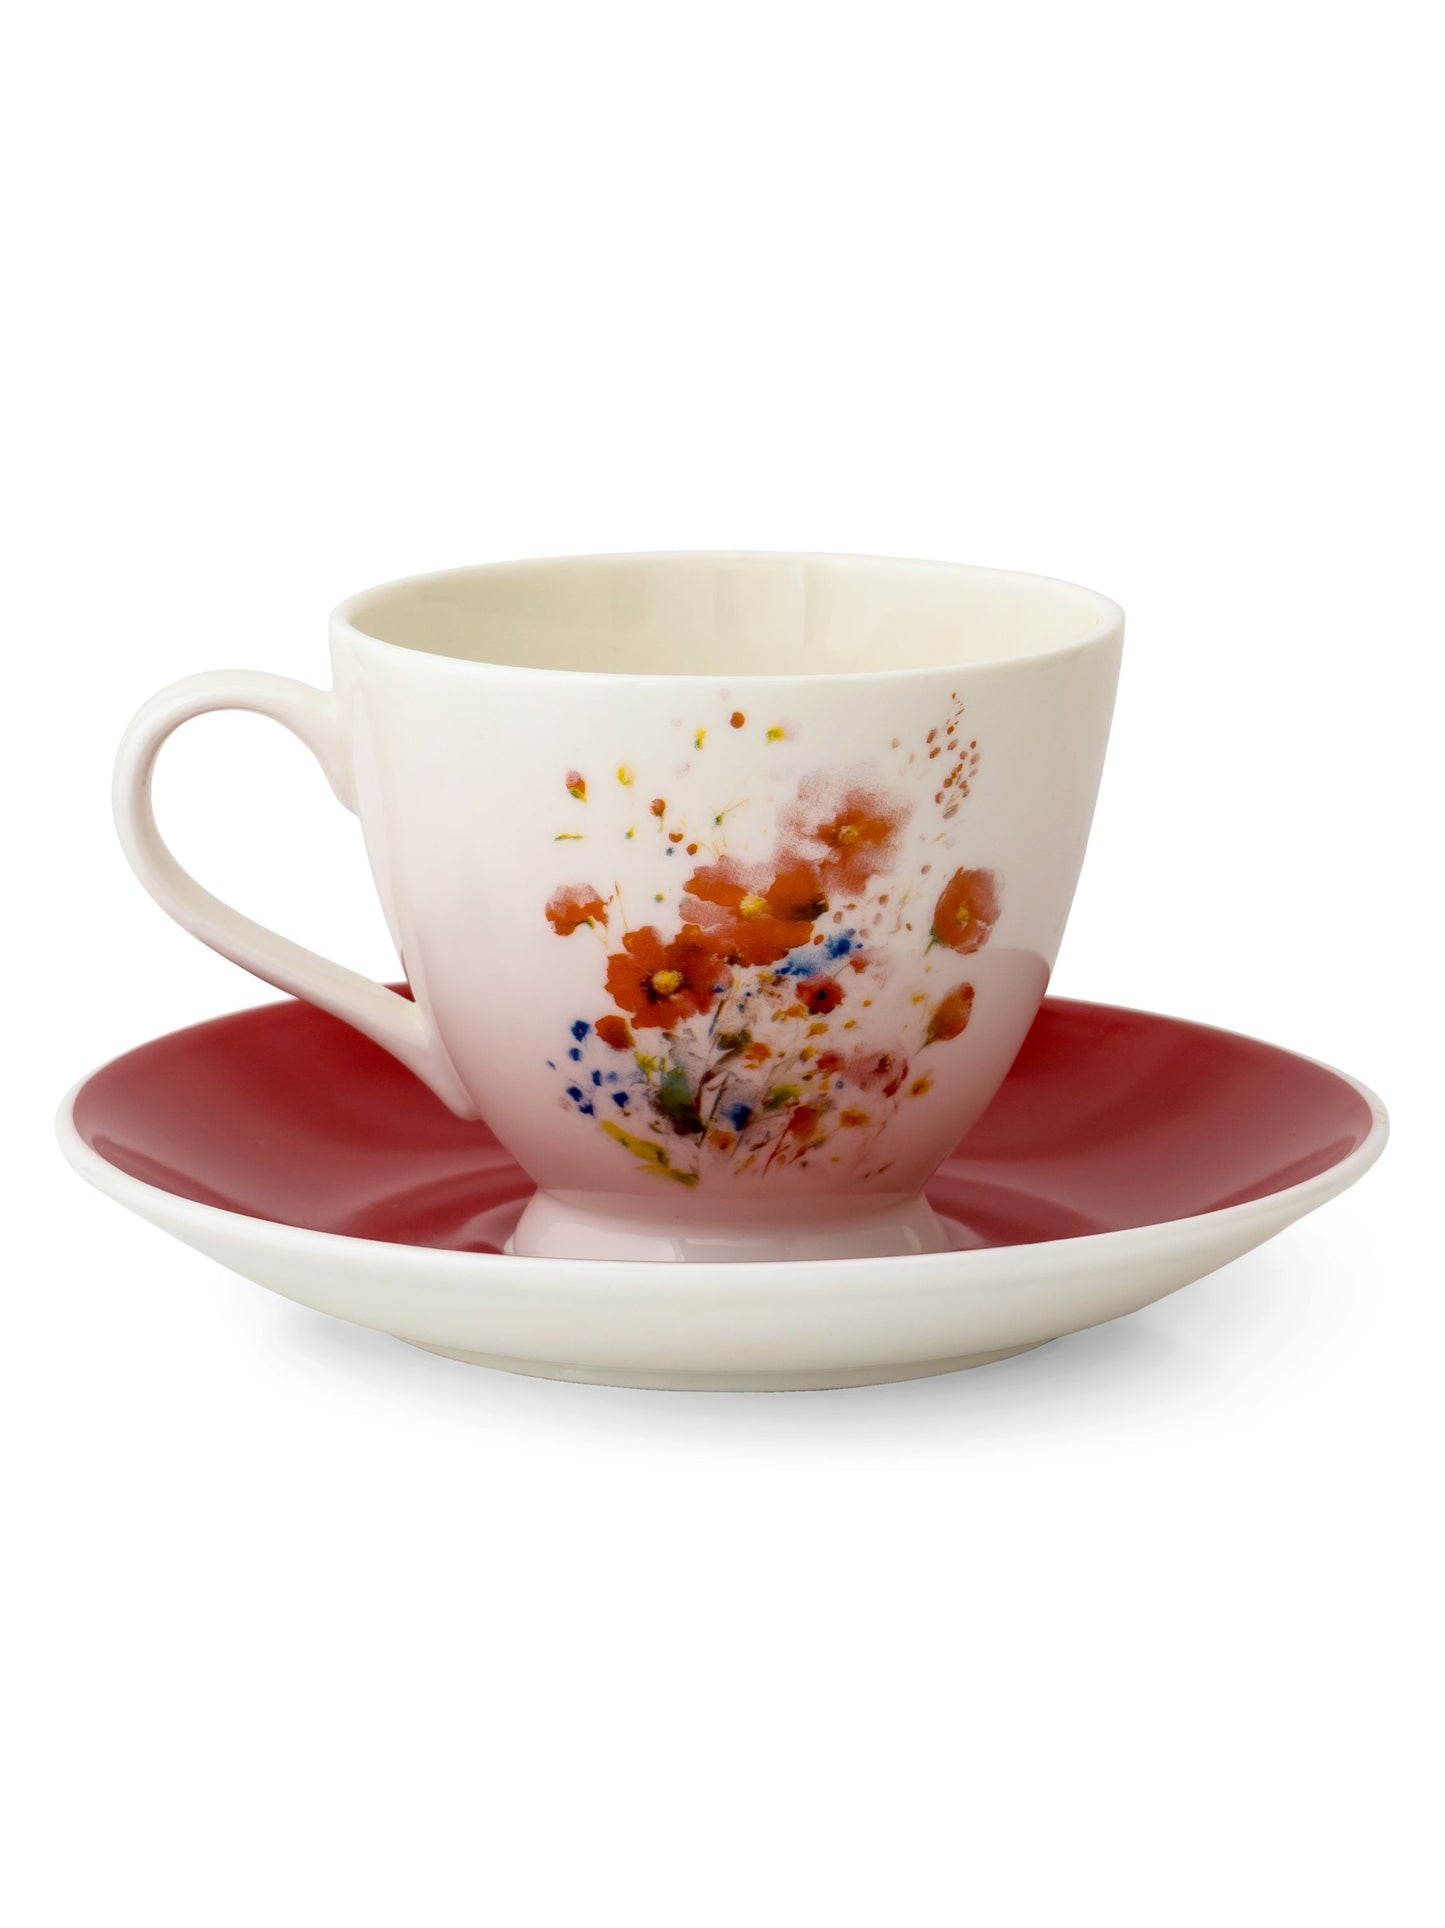 King Super Microwave Safe, Cup & Saucer, 160 ml, Set of 12 (6 Cups + 6 Saucers) (MW201)